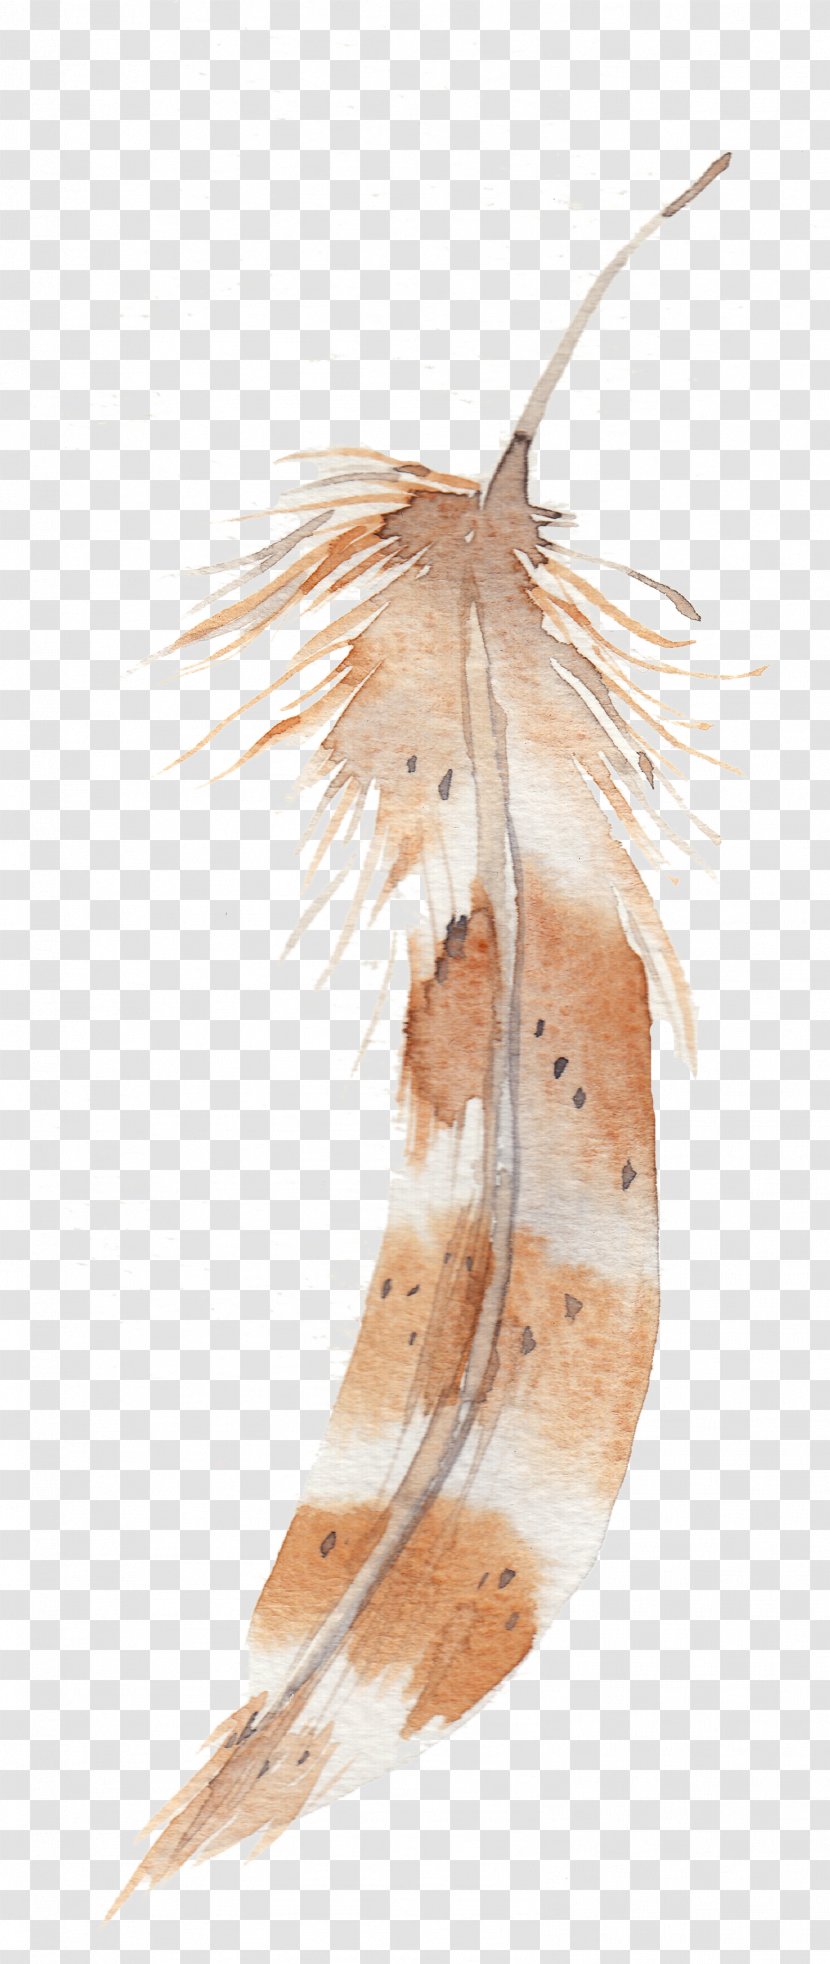 Feather Watercolor Painting - Invertebrate Transparent PNG